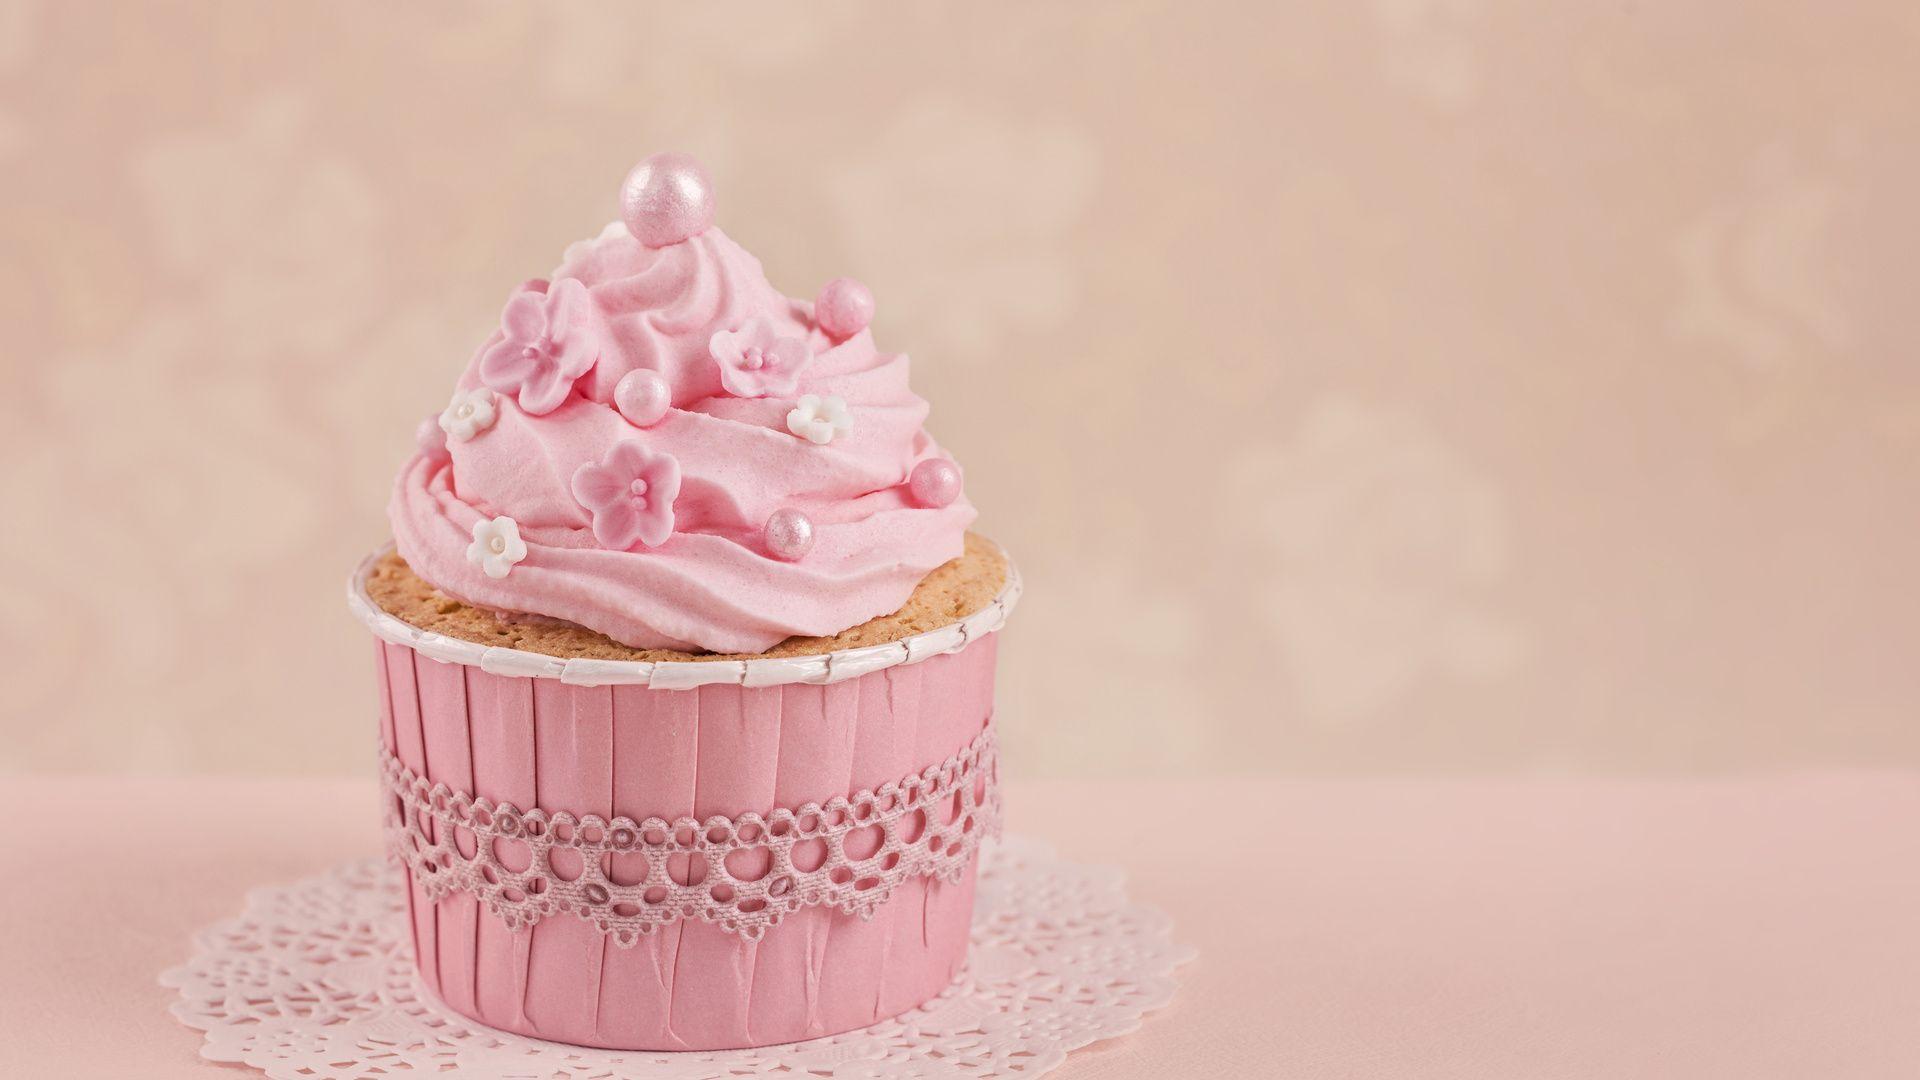 A pink cupcake with pink frosting on a pink background - Cupcakes